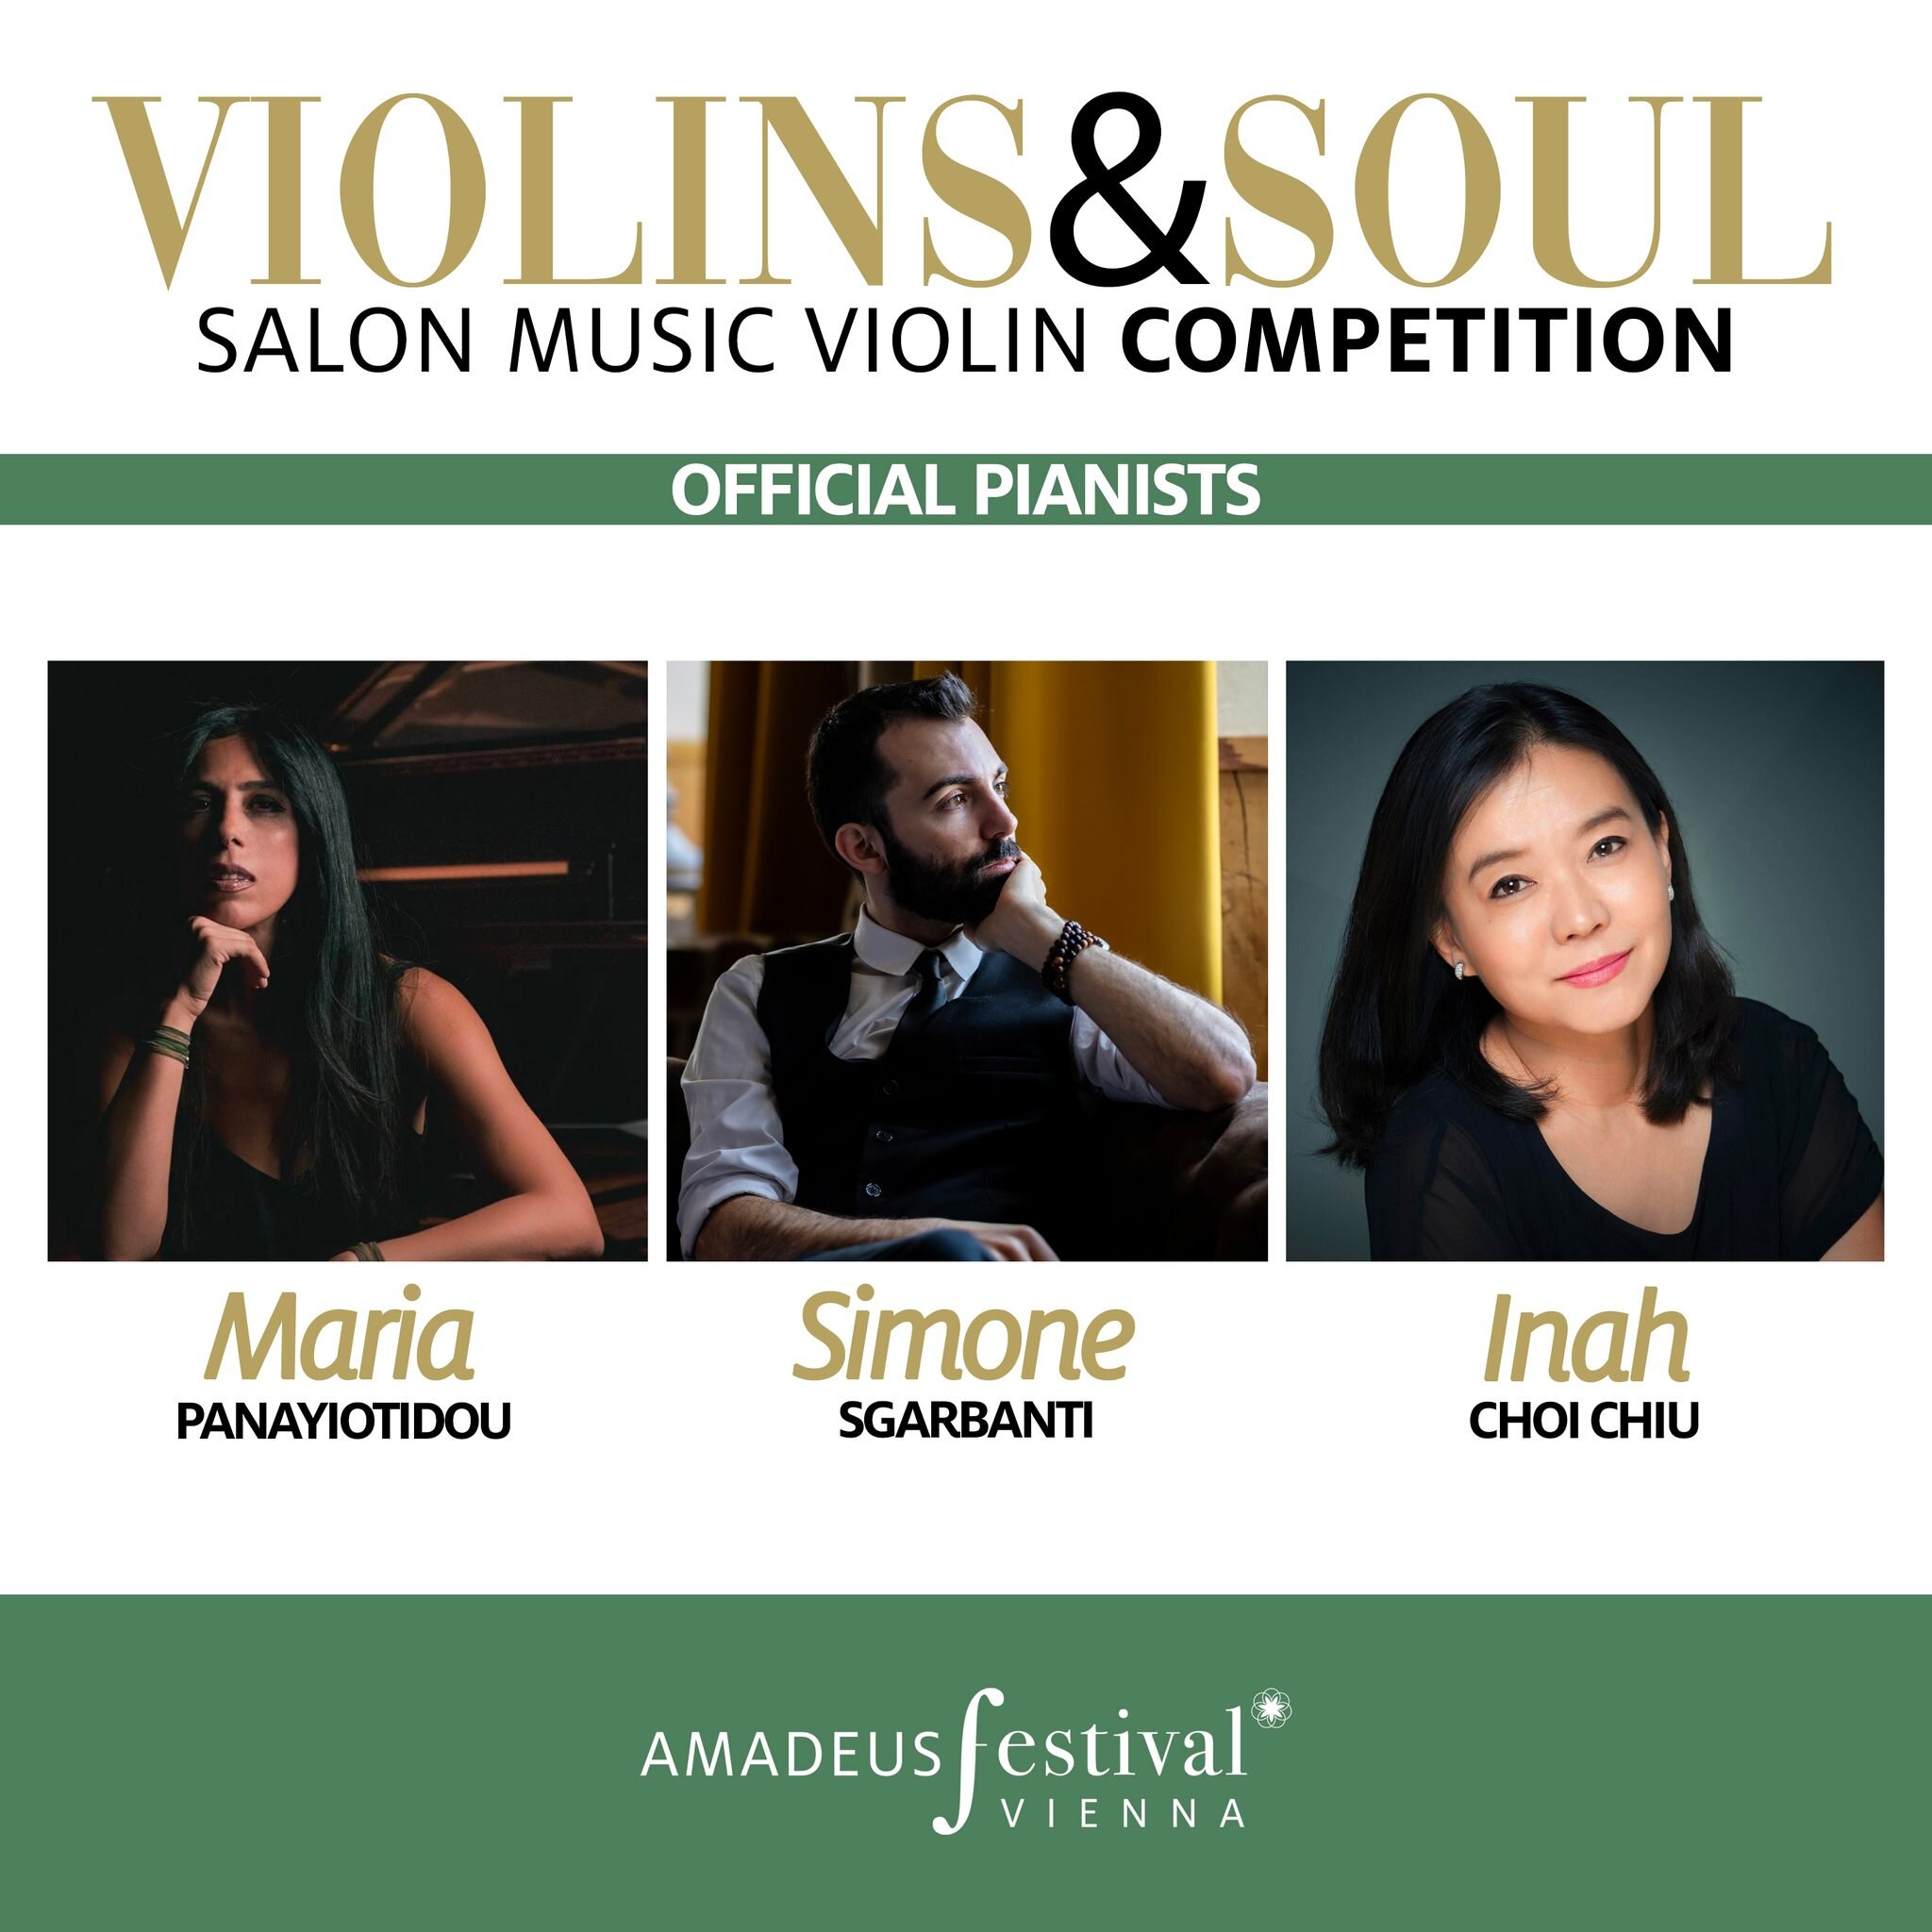 🎉 We are thrilled to announce the official pianists who will collaborate with our finalists in the 𝐅𝐢𝐧𝐚𝐥 𝐑𝐨𝐮𝐧𝐝 𝐨𝐟 𝐭𝐡𝐞 ❞𝐕𝐢𝐨𝐥𝐢𝐧𝐬&amp;𝐒𝐨𝐮𝐥❞ 𝐂𝐨𝐦𝐩𝐞𝐭𝐢𝐭𝐢𝐨𝐧.
.
✨ Along with the finalists, these talented musicians will he